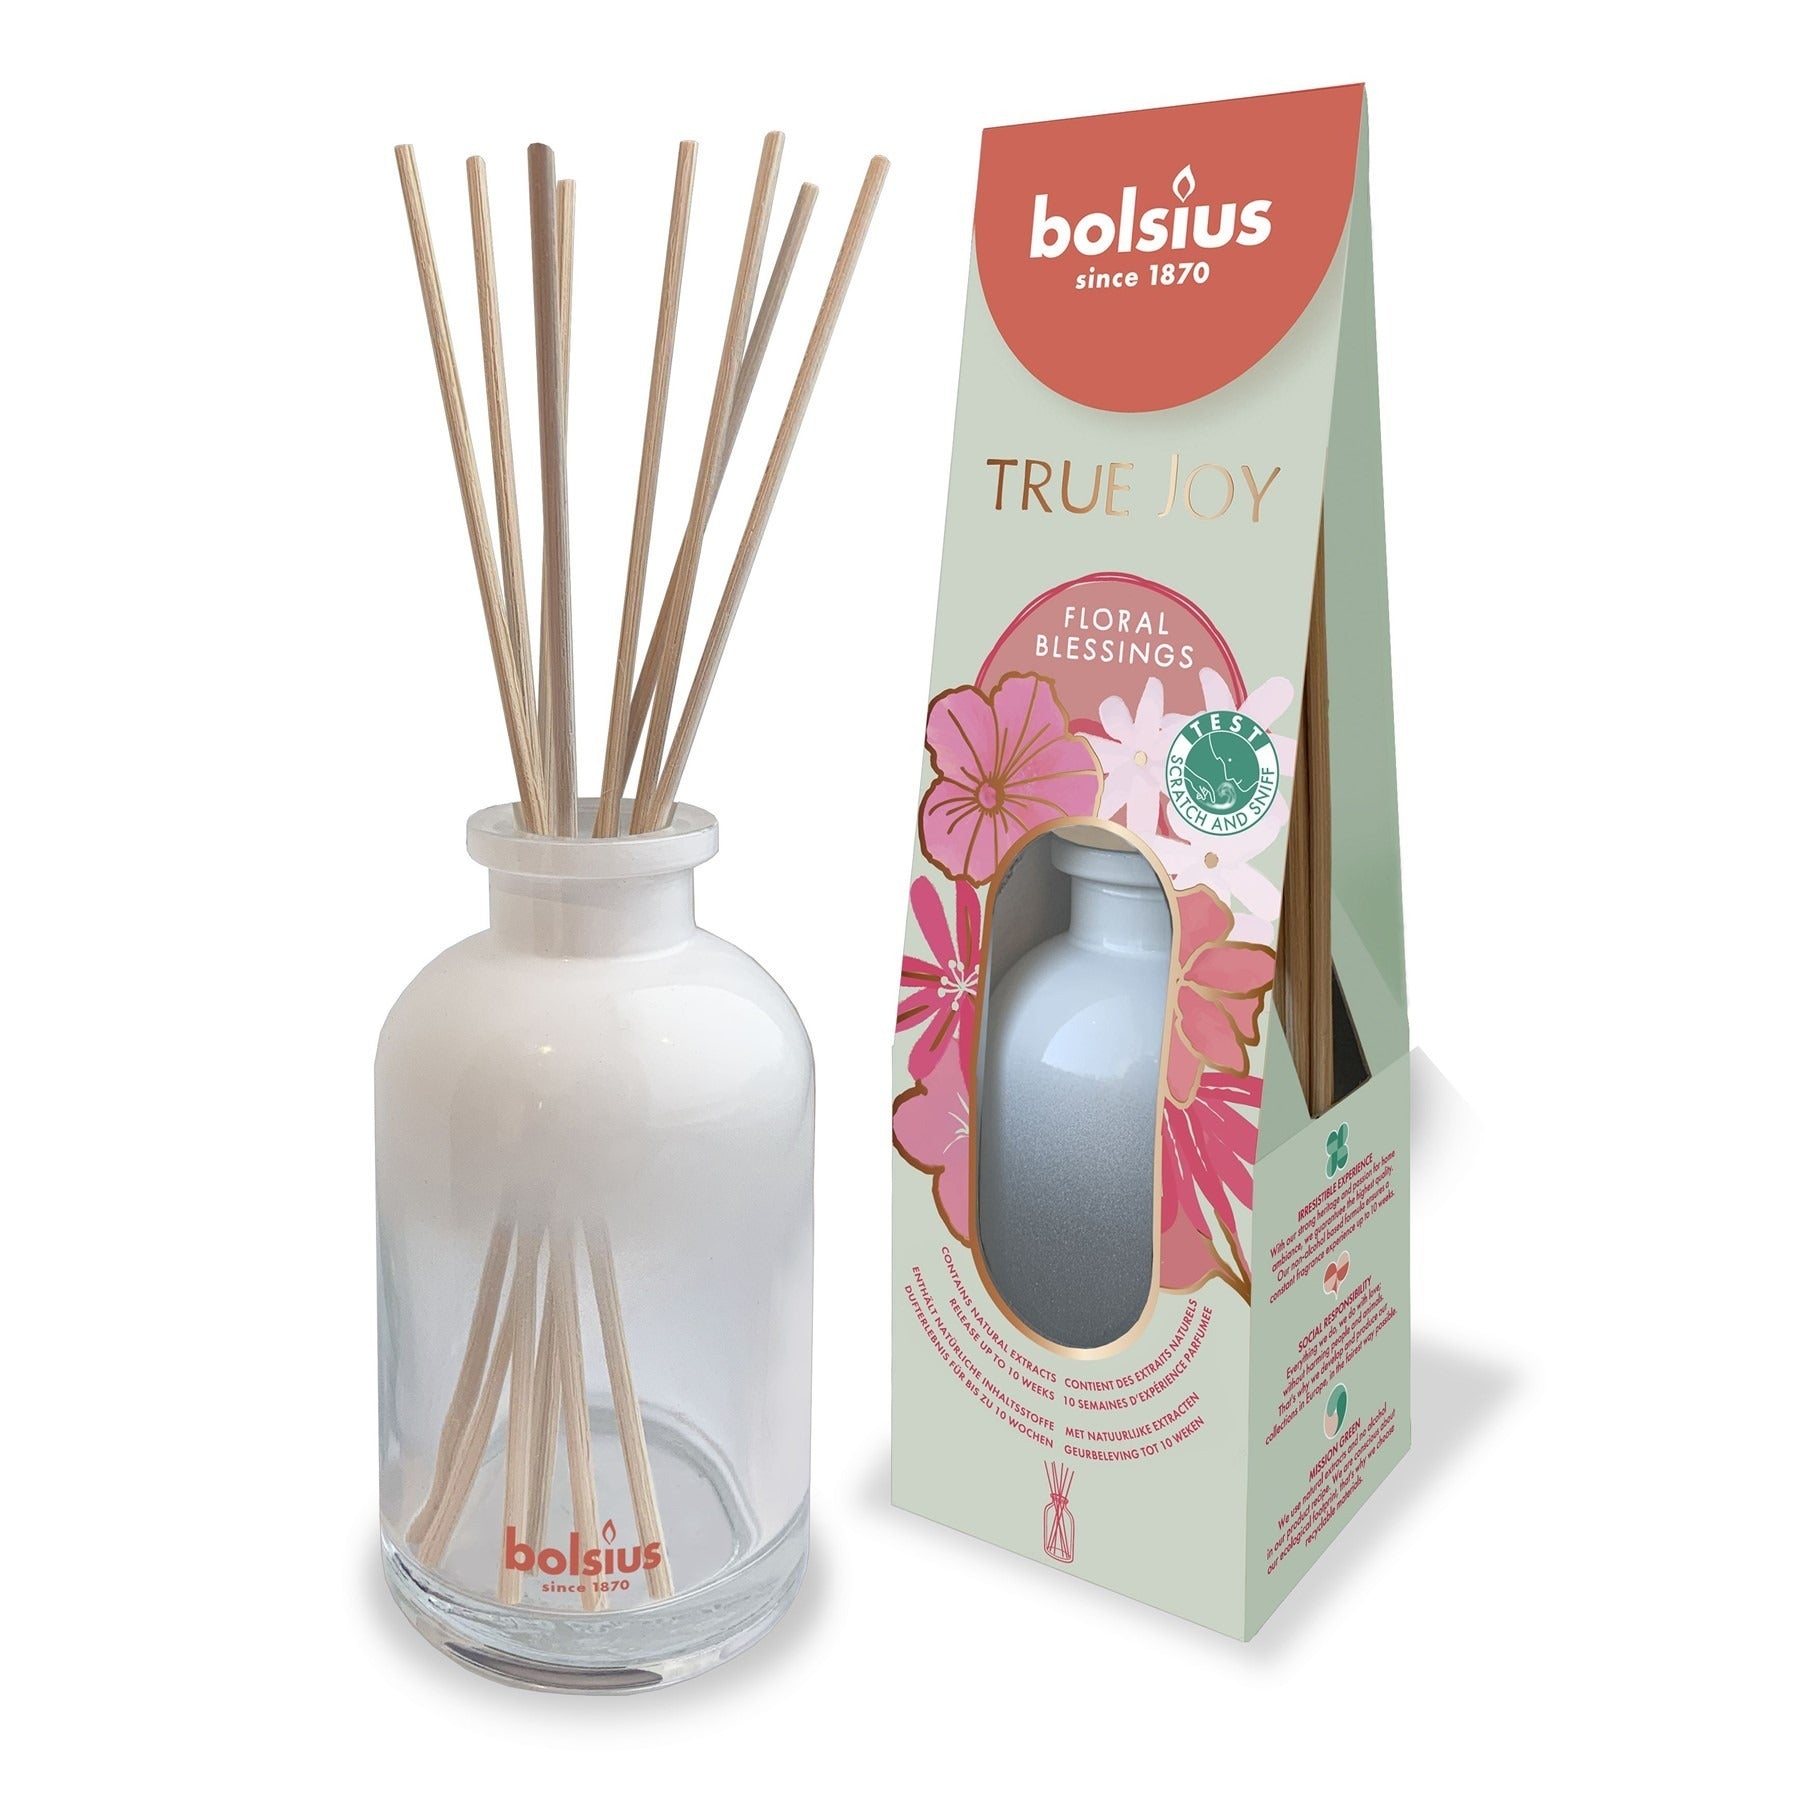 View Floral Blessings True Joy Reed Diffuser information